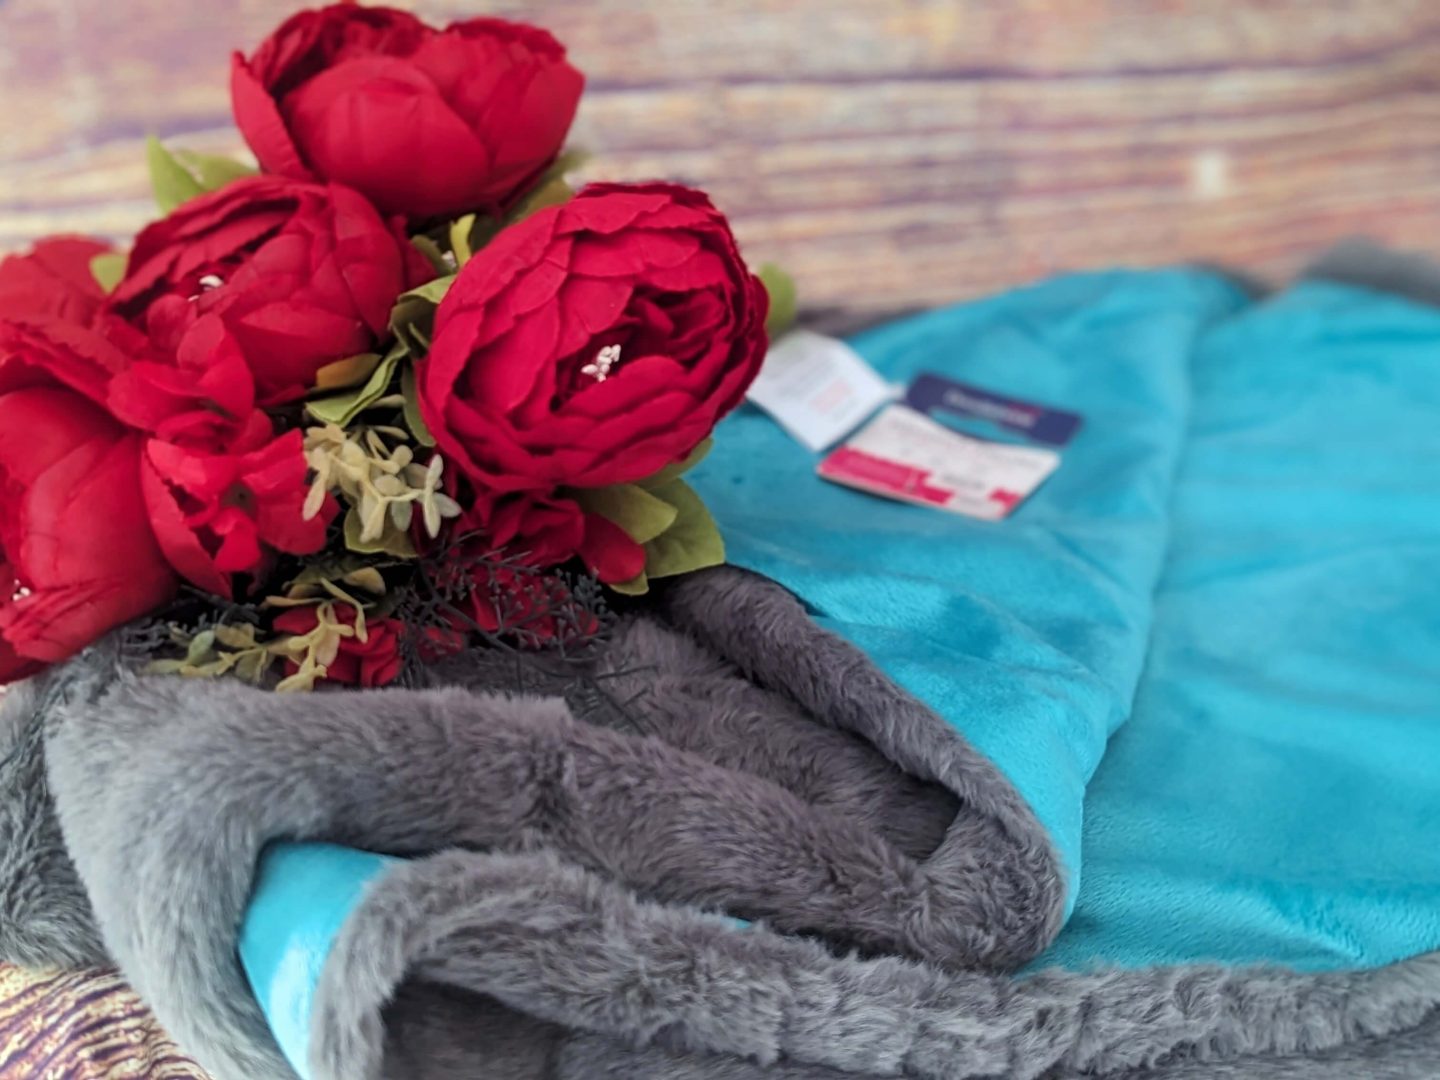 Turquoise and grey doodlebone dog blanket displayed against a wooden backdrop with red flowers beside